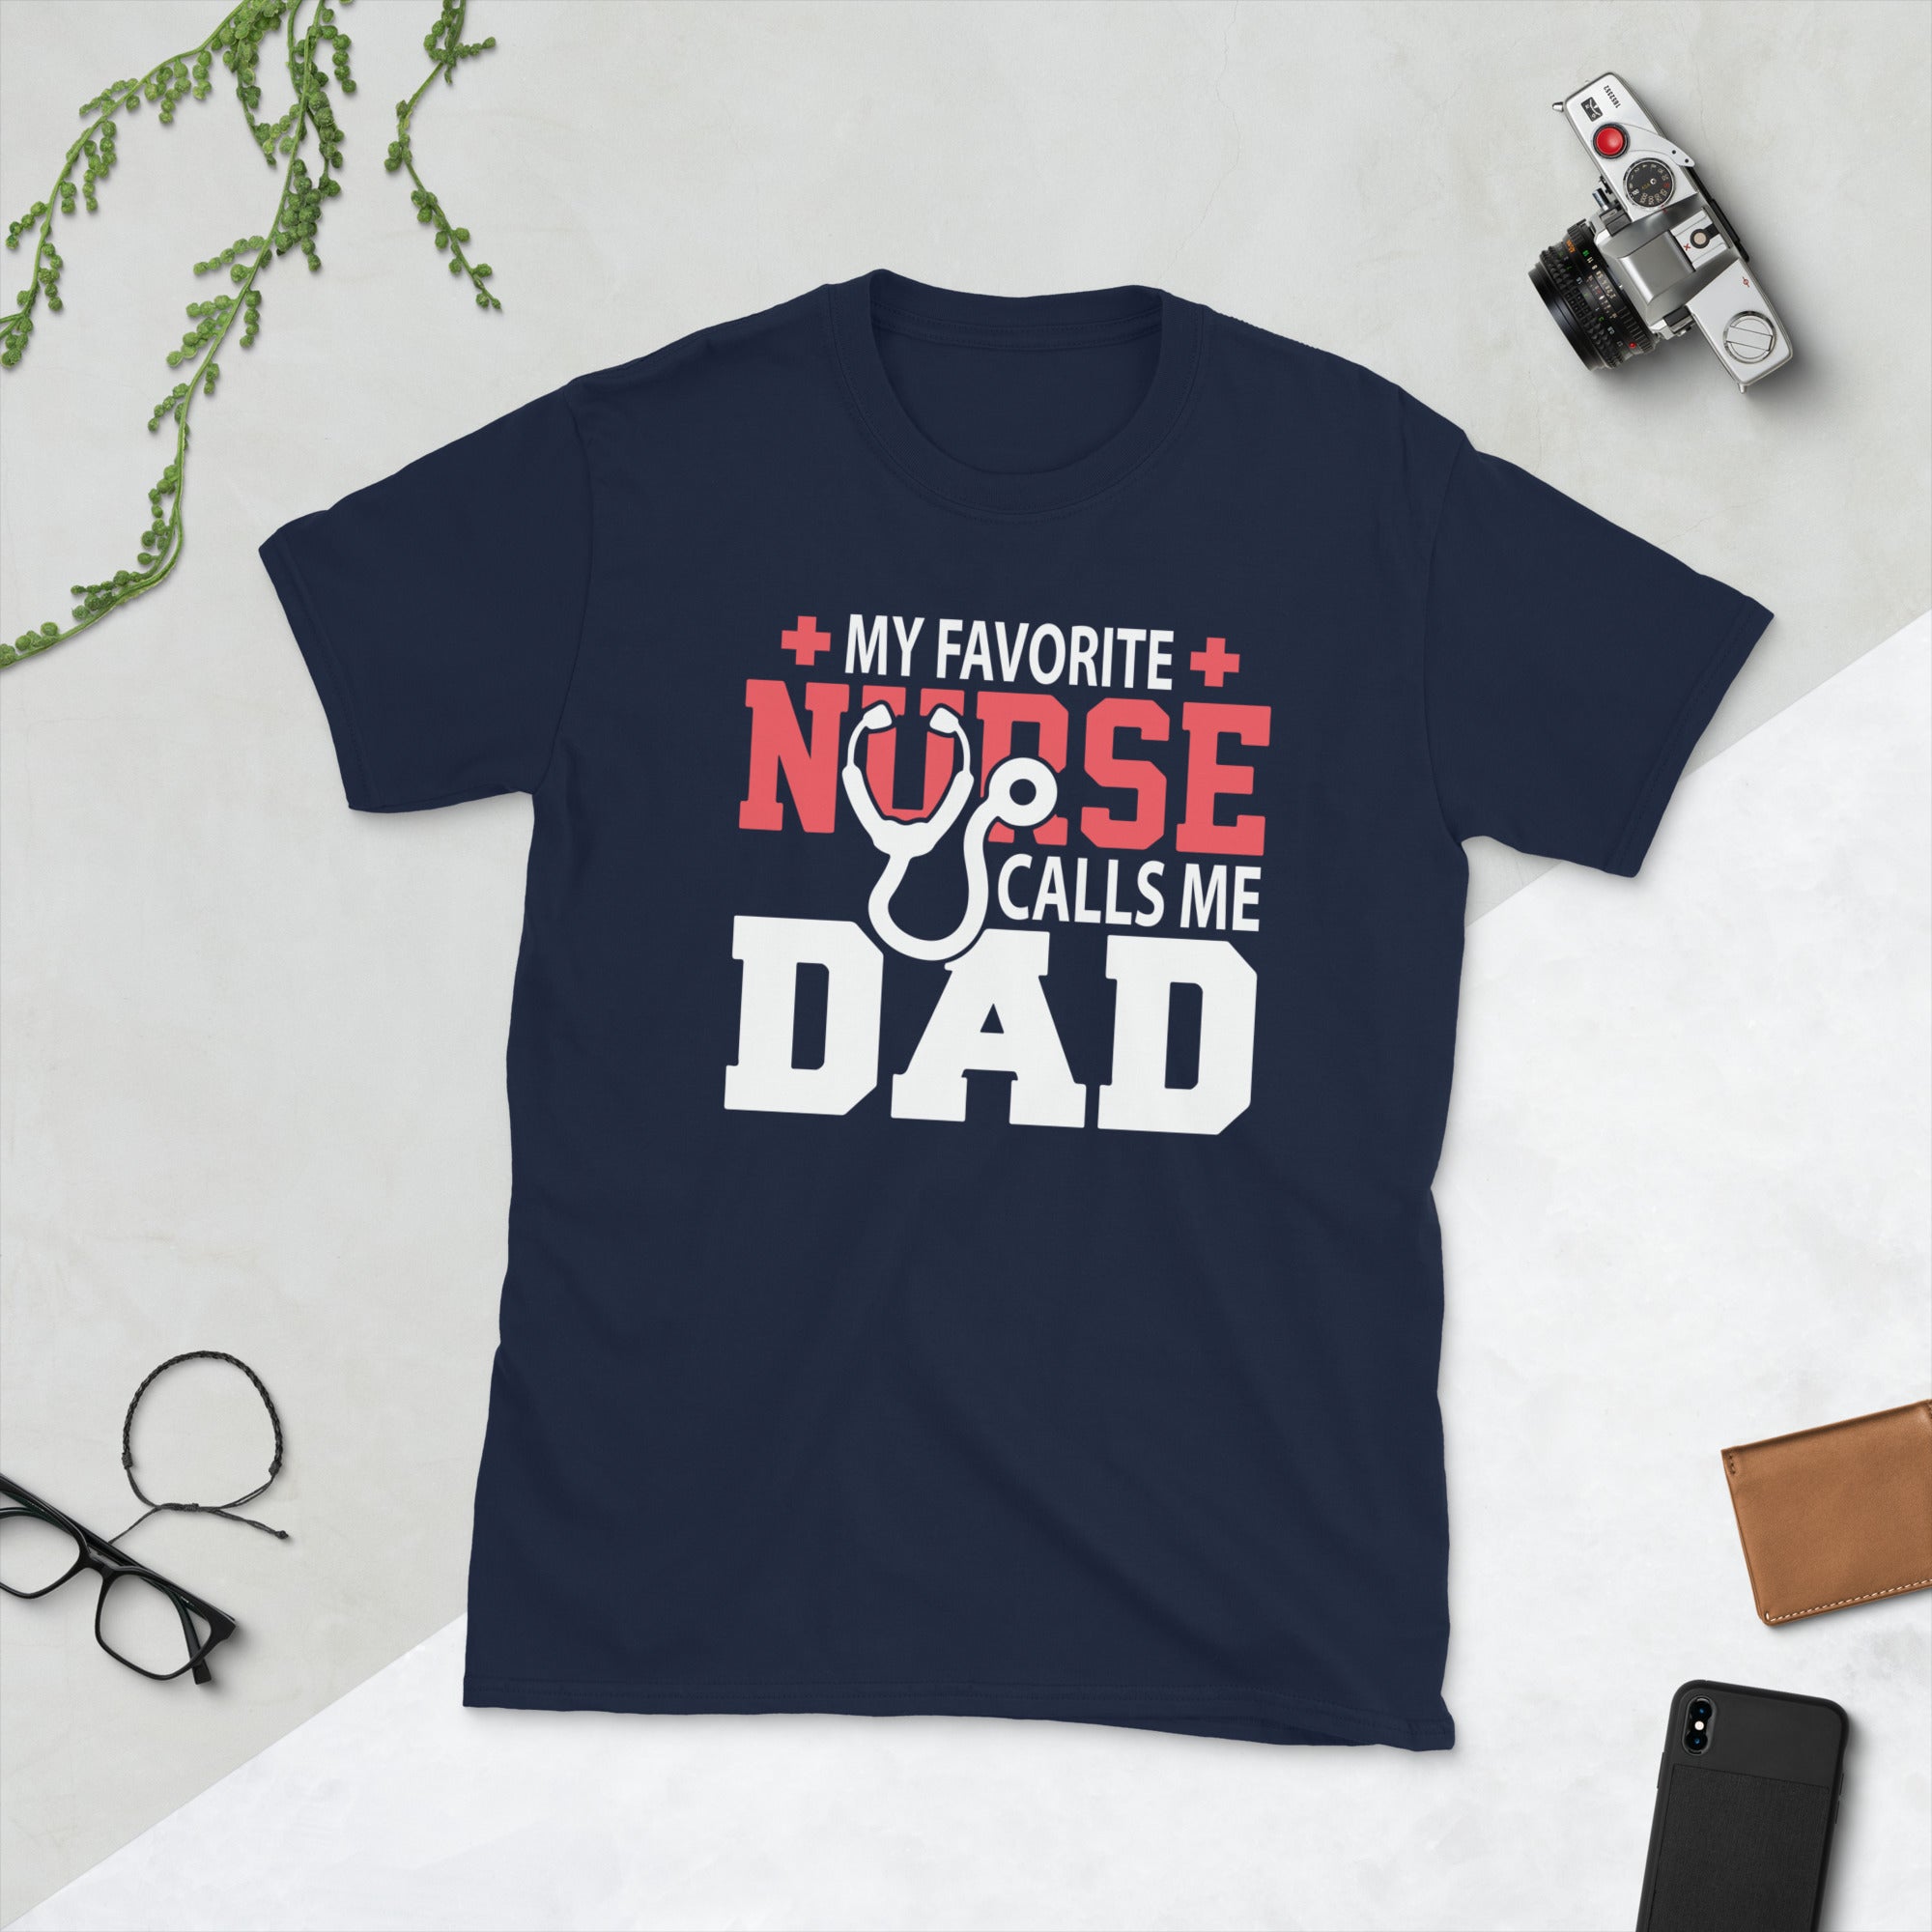 My Favorite Nurse Calls Me Dad Shirt, Birthday Fathers Day Gift for Proud Dad of a Nurse, Nurse Dad Shirt, Father Daughter Nurse Gift Shirt